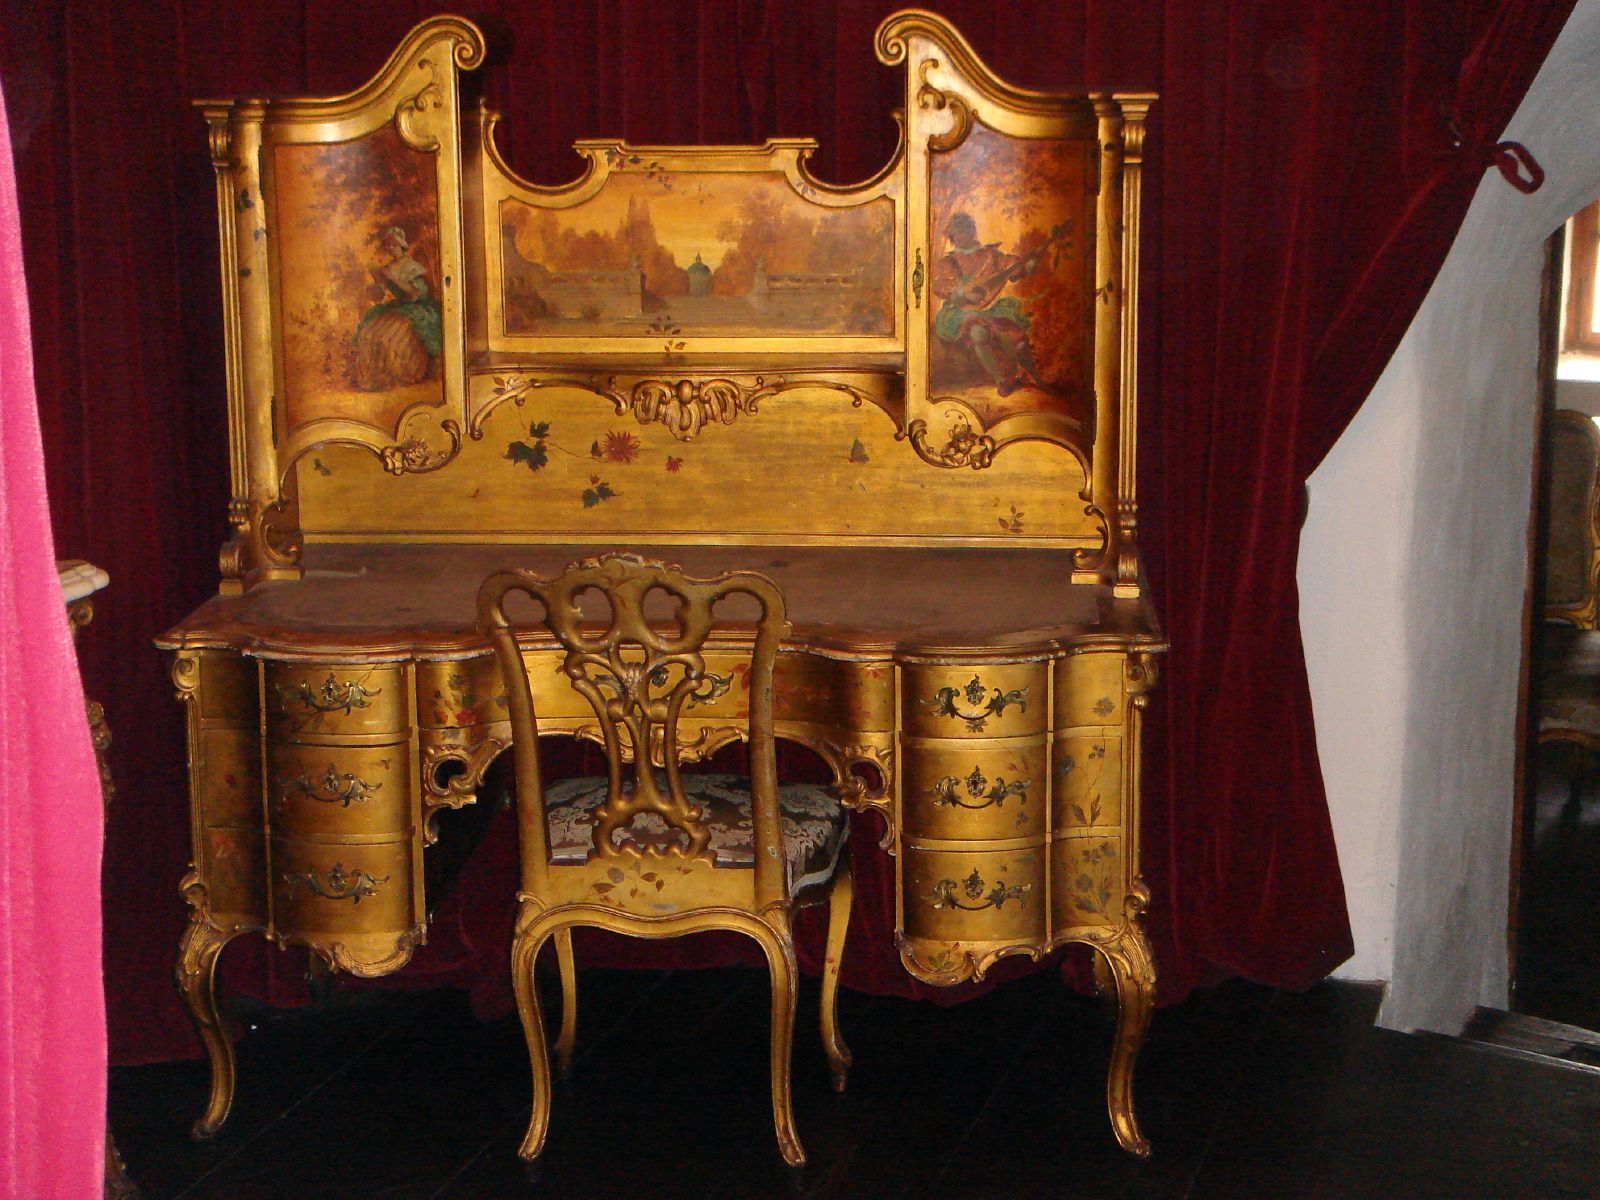 the vanity has gold painted flowers on it